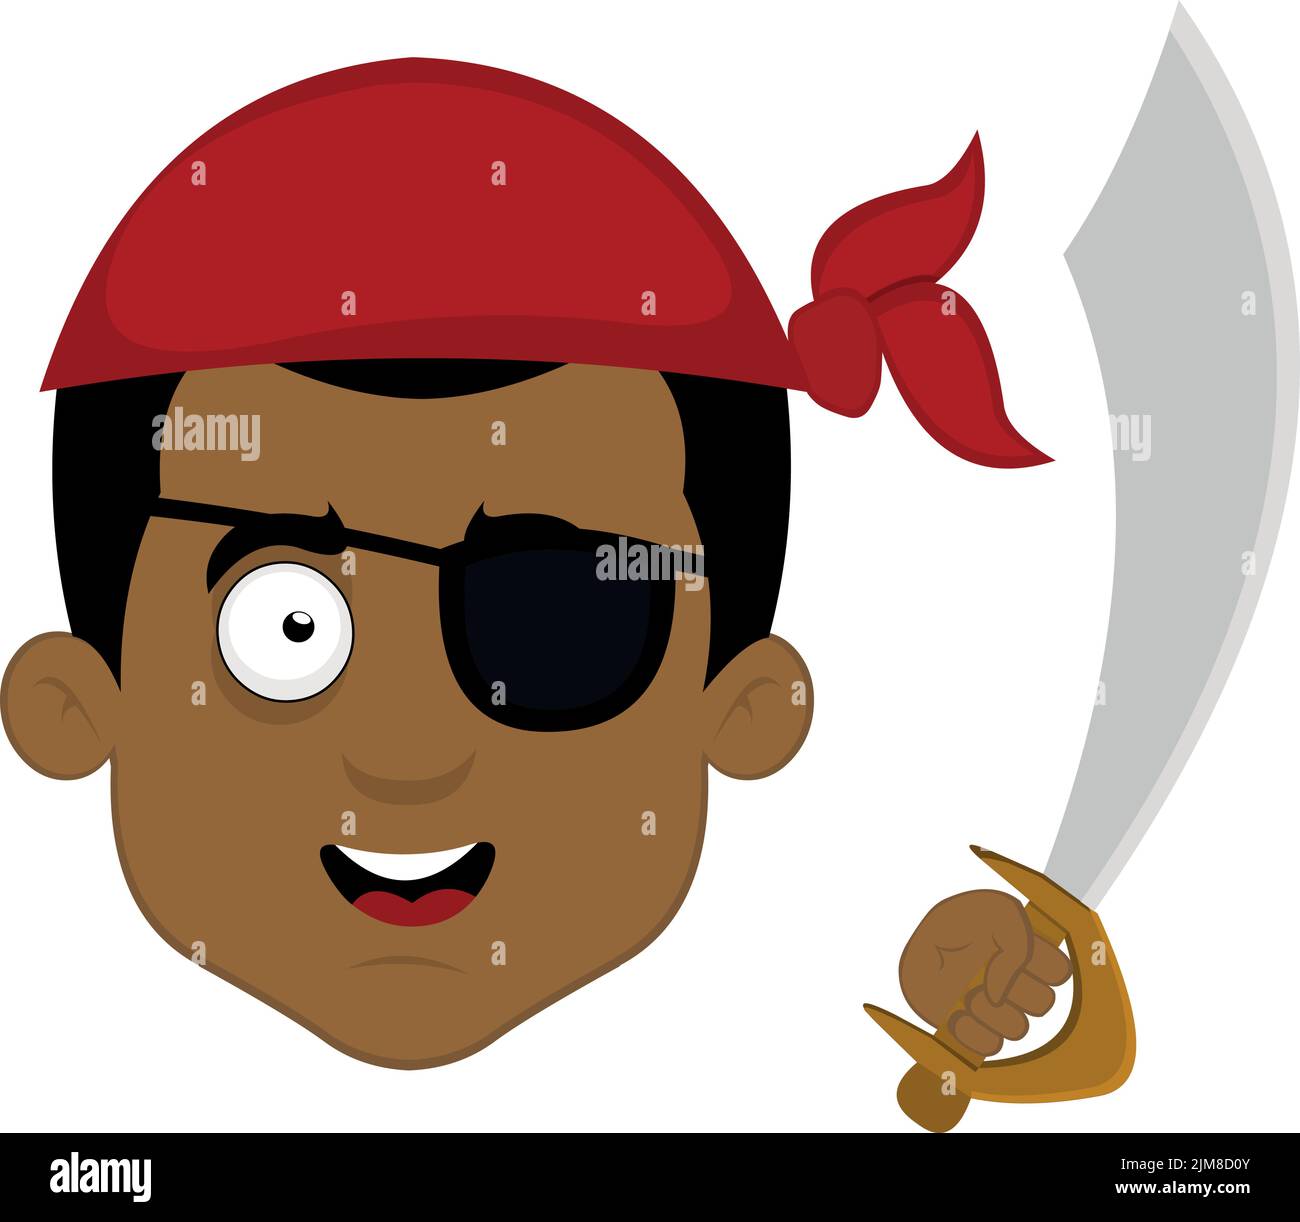 Vector illustration of the face of a cartoon pirate, with a headscarf, an eye patch and a sword in his hand Stock Vector